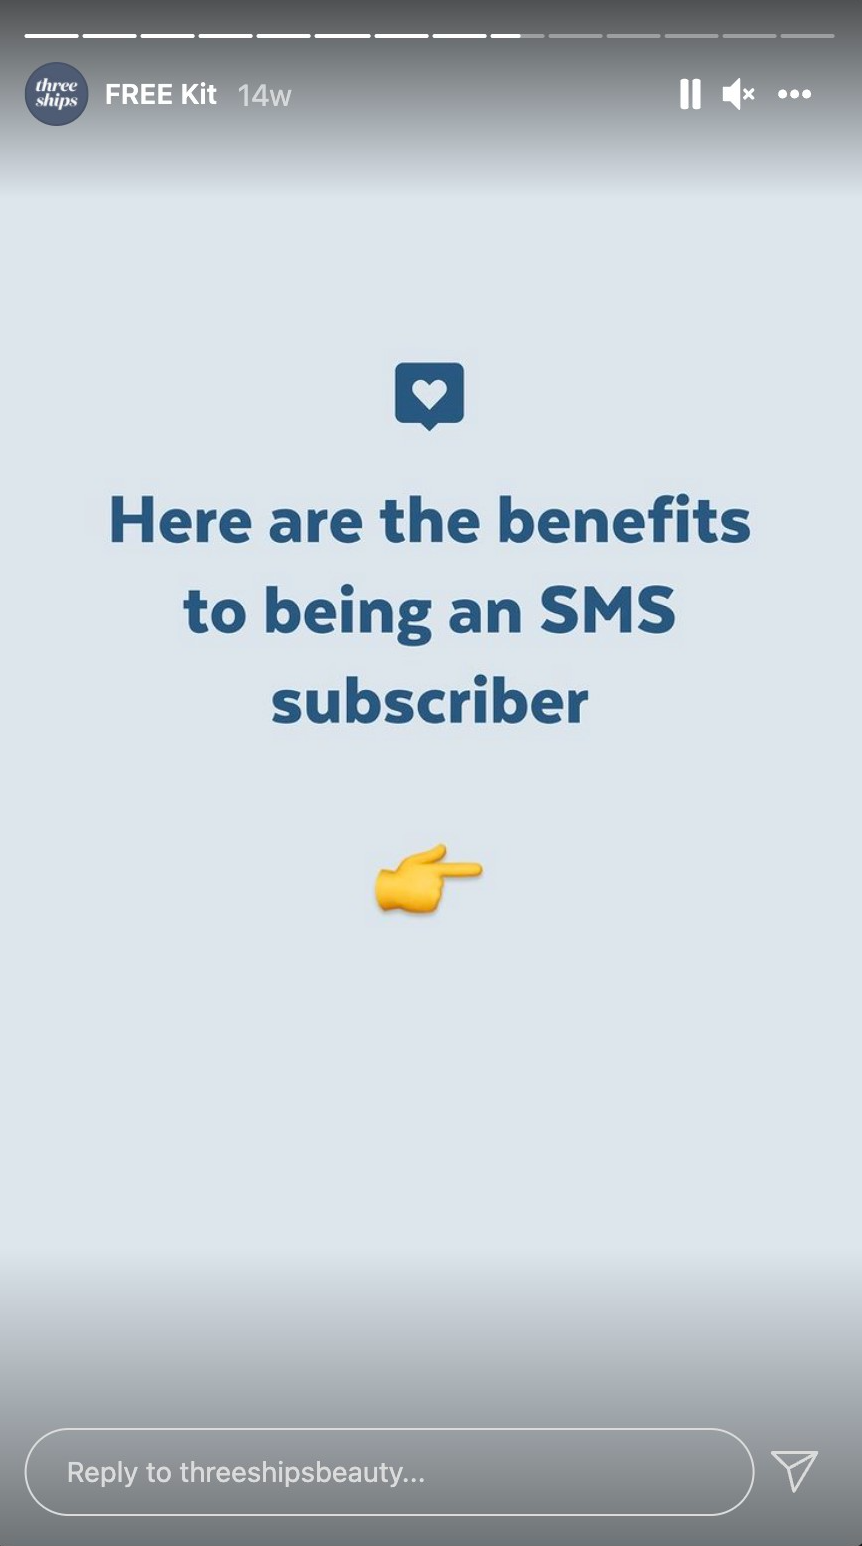 Screenshot from Three Ships' Instagram Story that says "Here are the benefits to being an SMS subscriber."